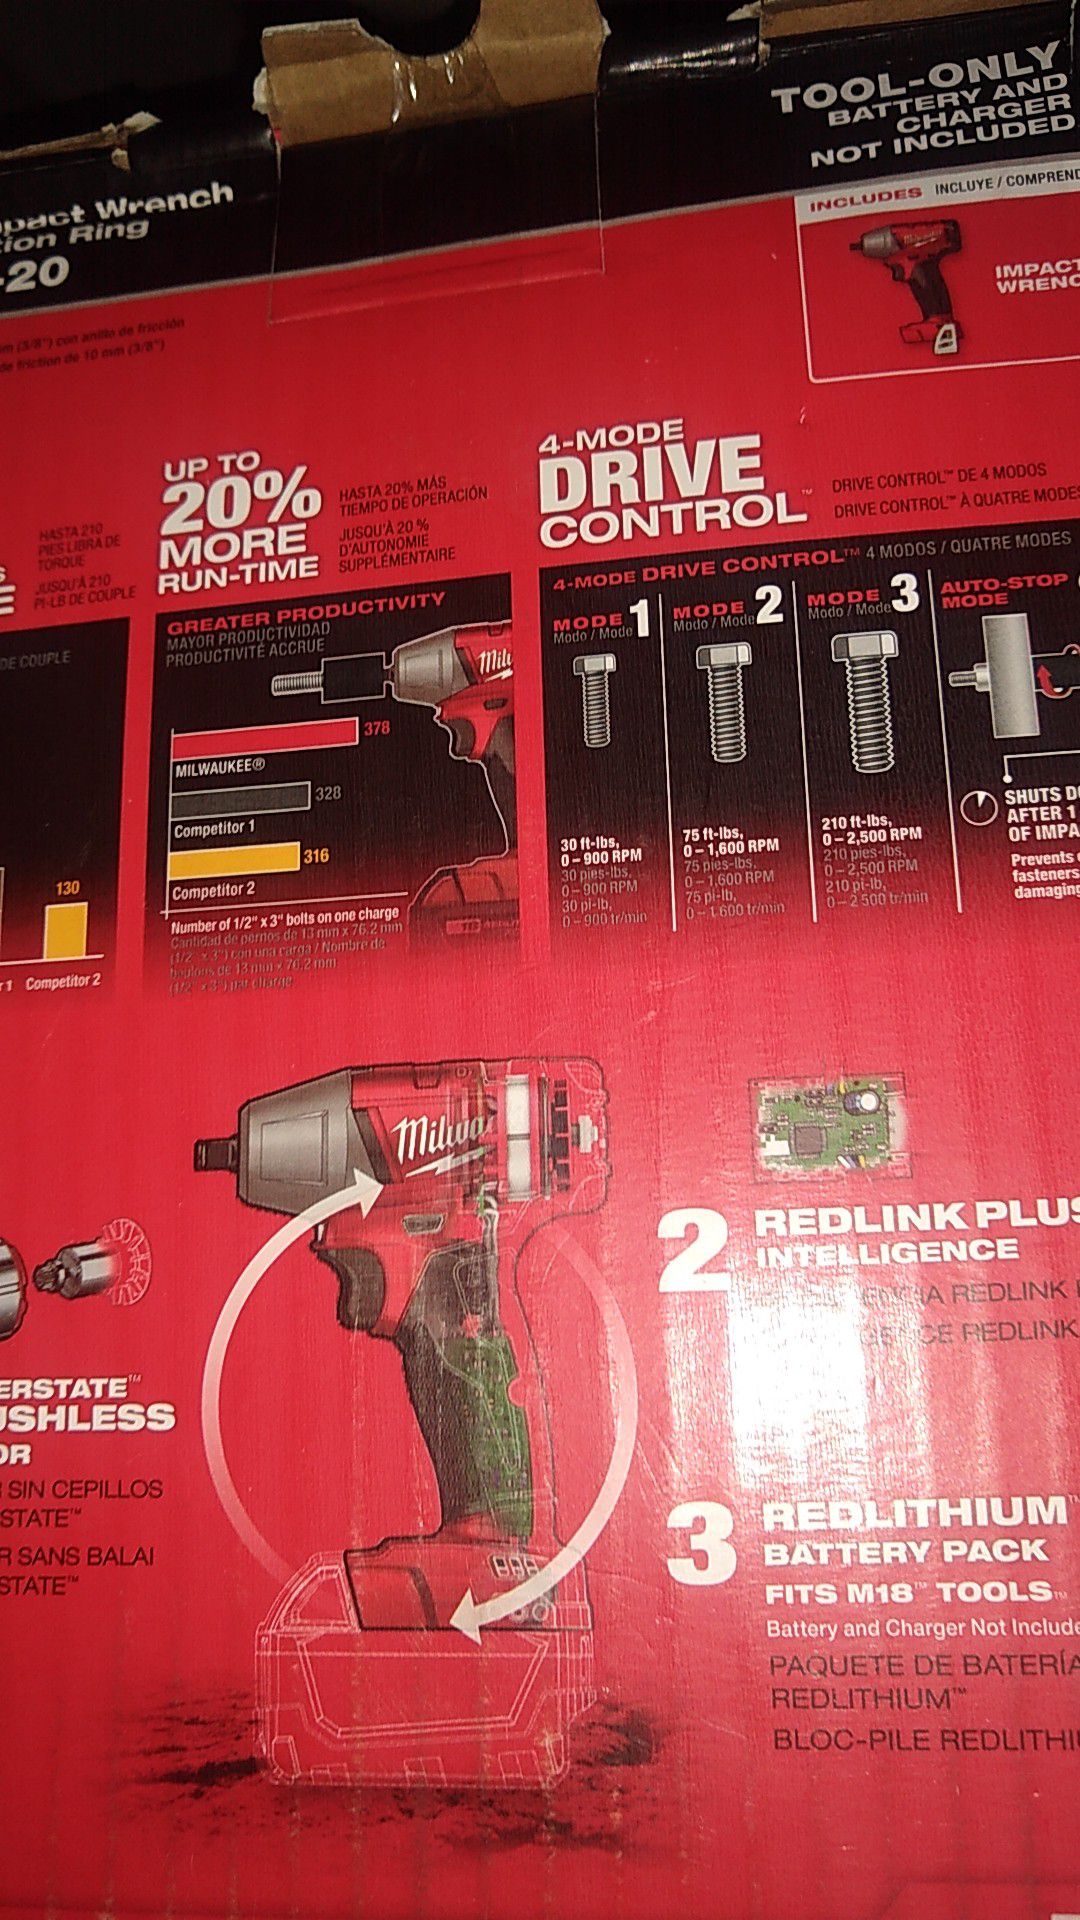 Impact wrench only make me an offer